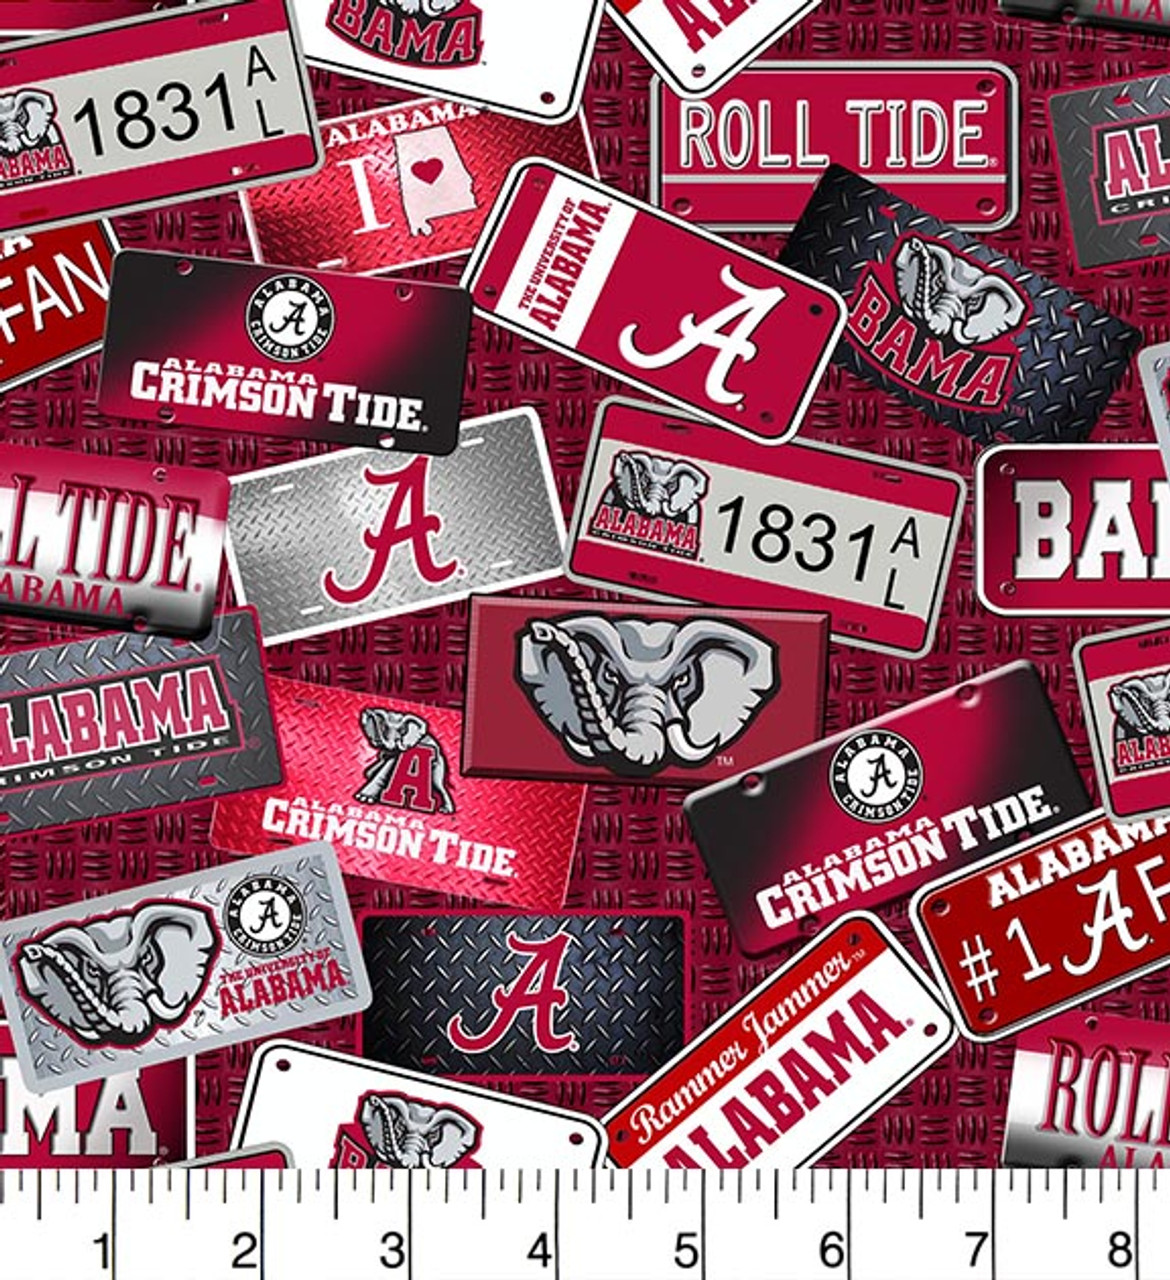 University of Alabama Crimson Tide Cotton Fabric with License Plate Print or Matching Solid Cotton Fabrics